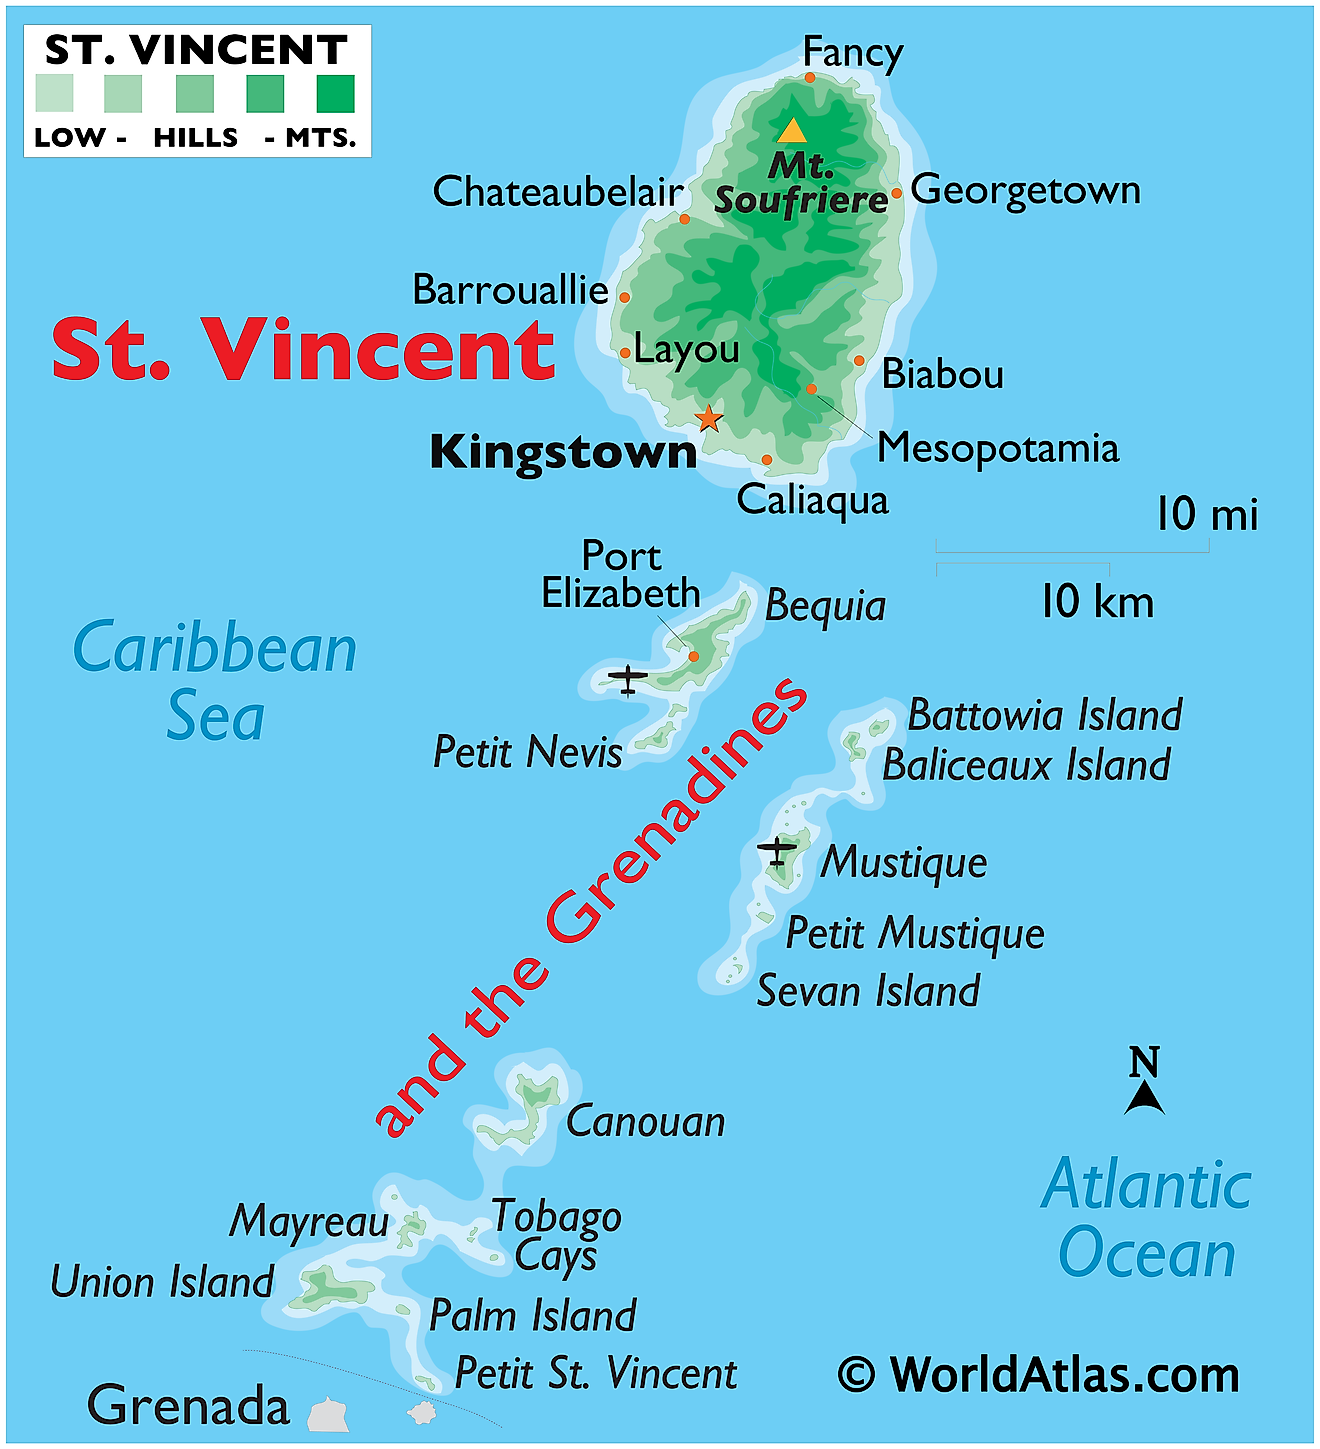 Physical Map of St. Vincent and The Grenadines showing relief, islands, ports, airport, important settlements, etc.